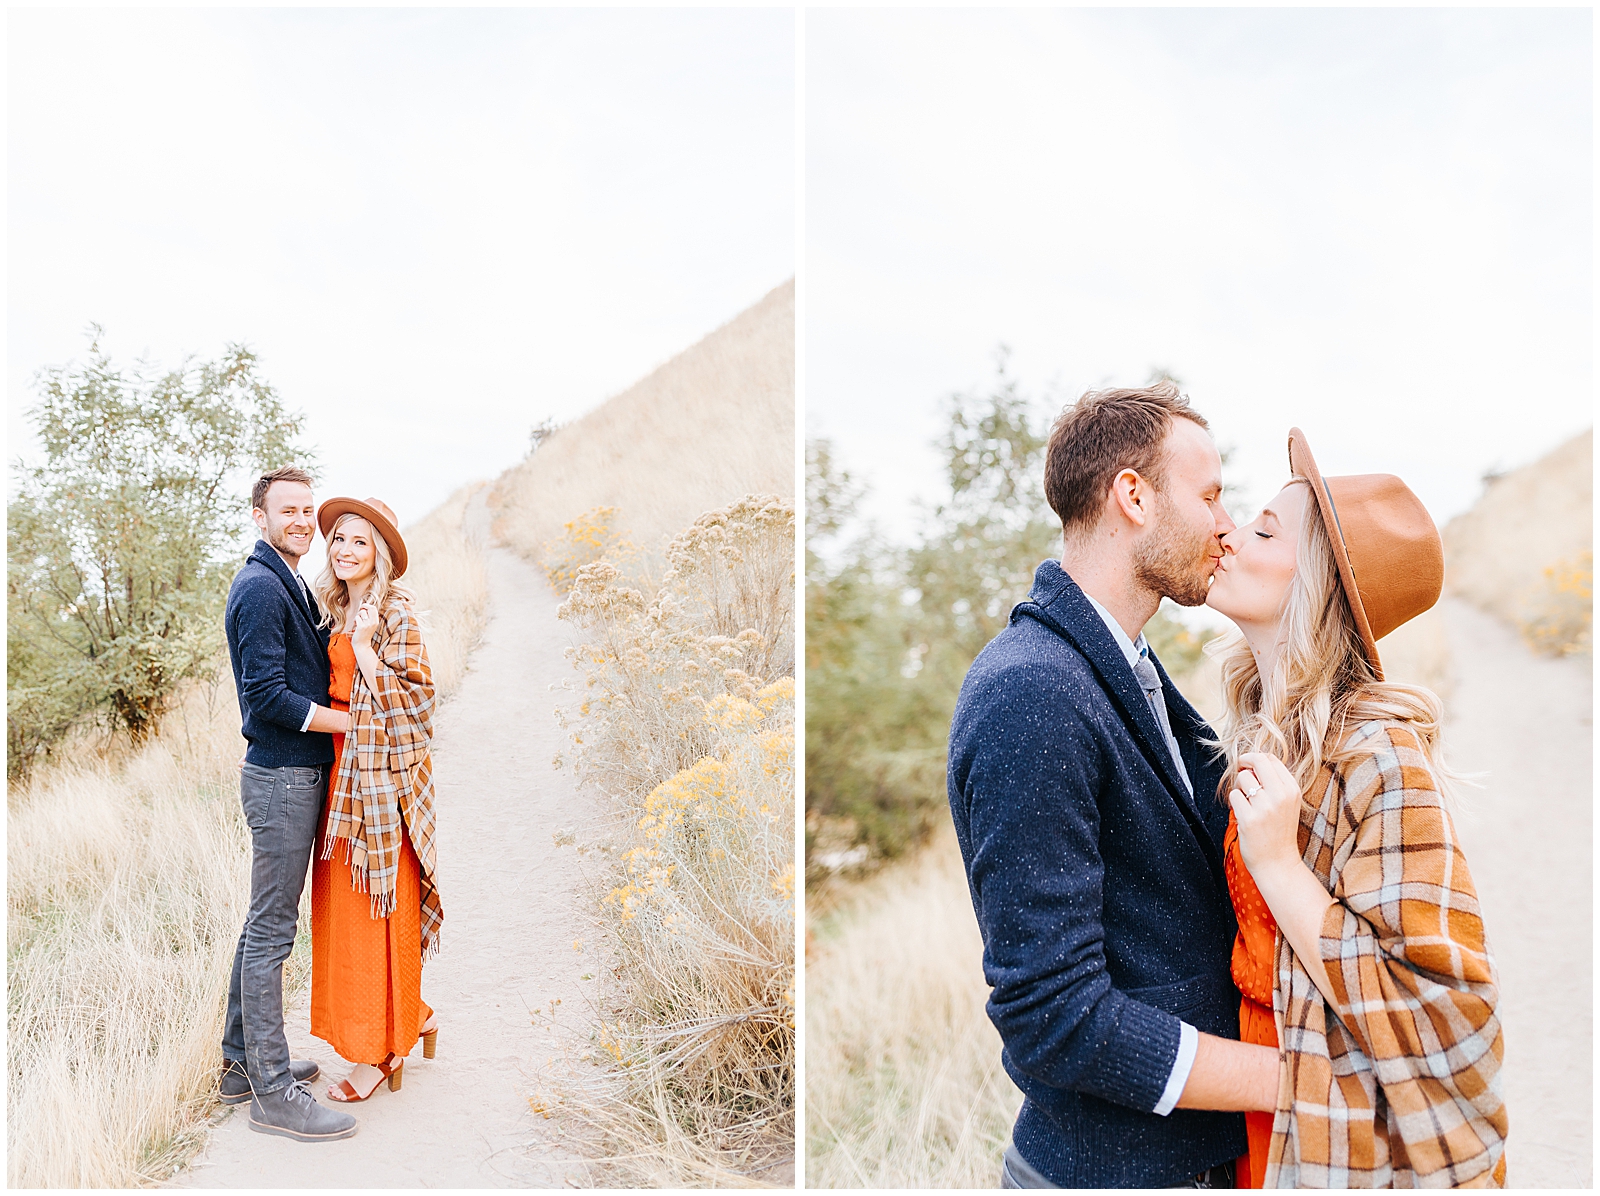 Dreamy Fall Engagement Photos Boise Foothills